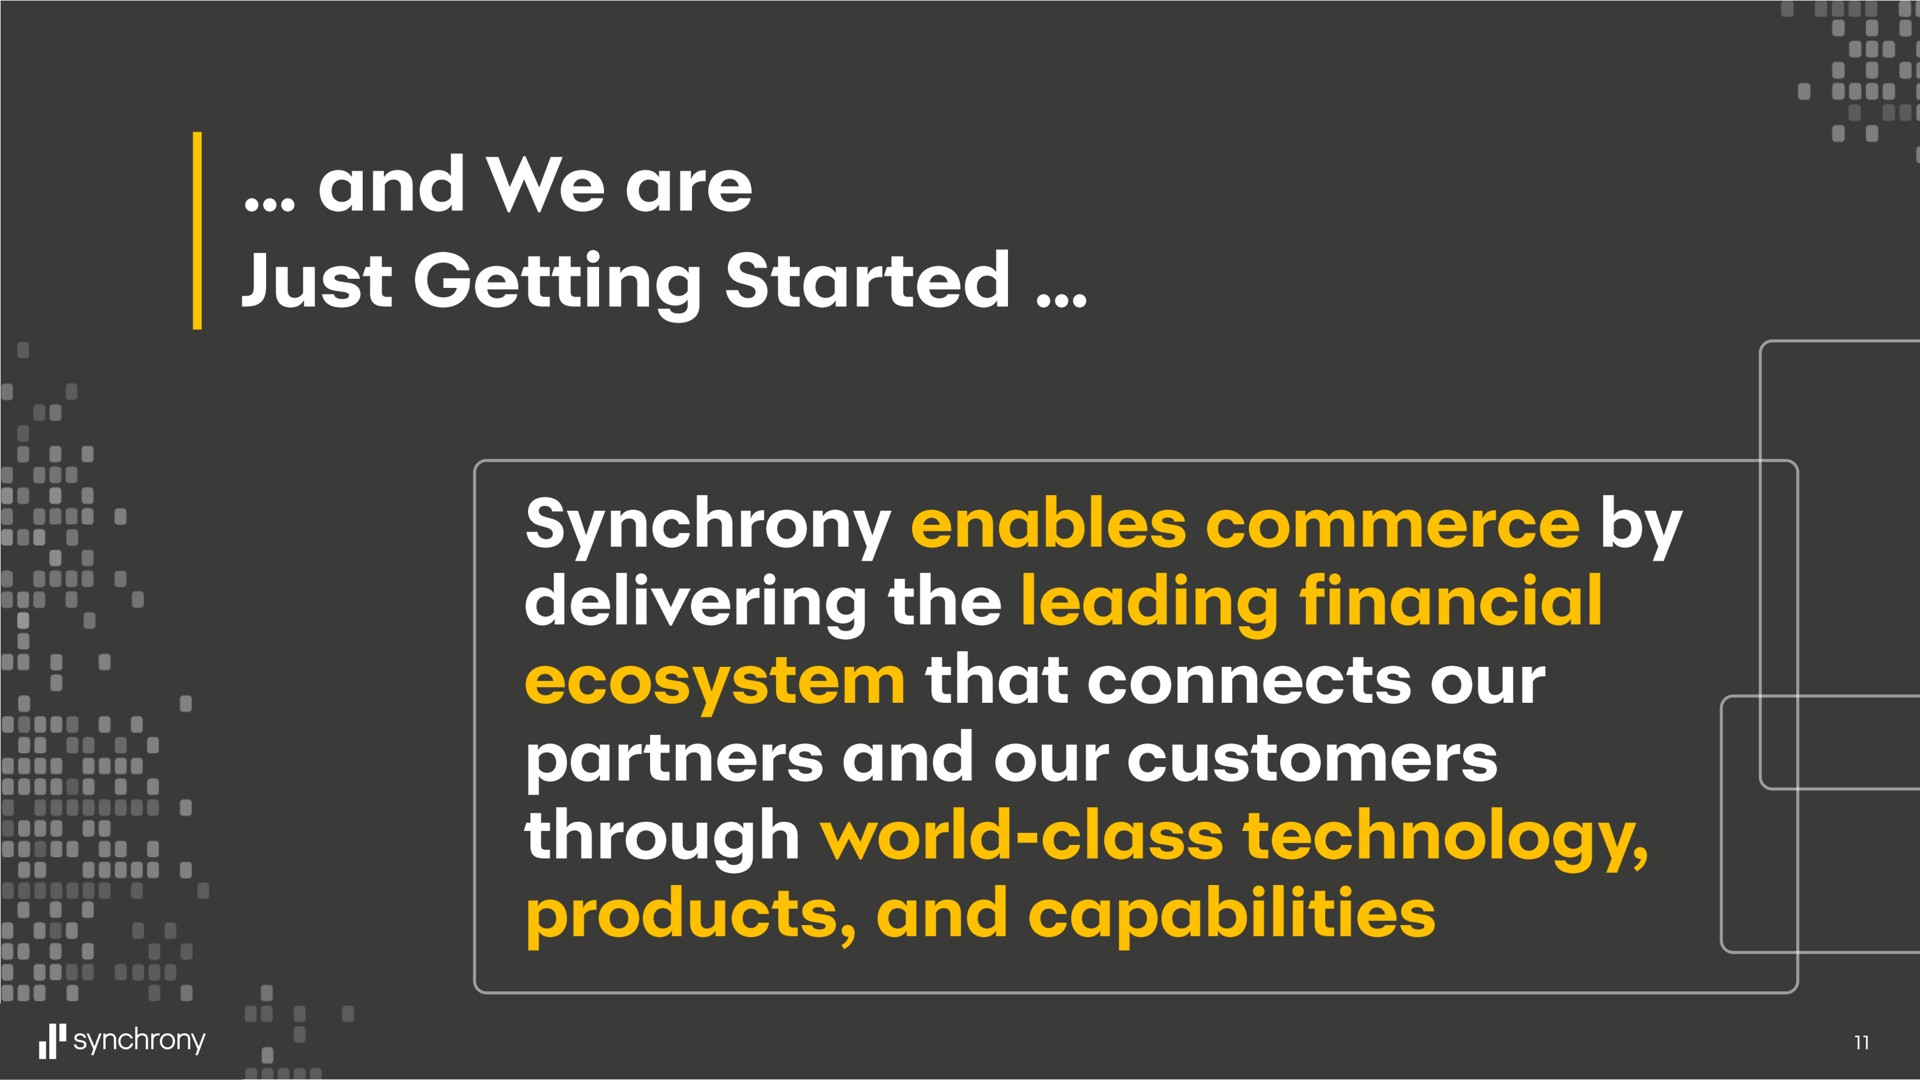 and we are just getting started products and capabilities synchrony enables commerce by delivering the leading financial ecosystem that connects our partners and our customers through world class technology | Synchrony Financial